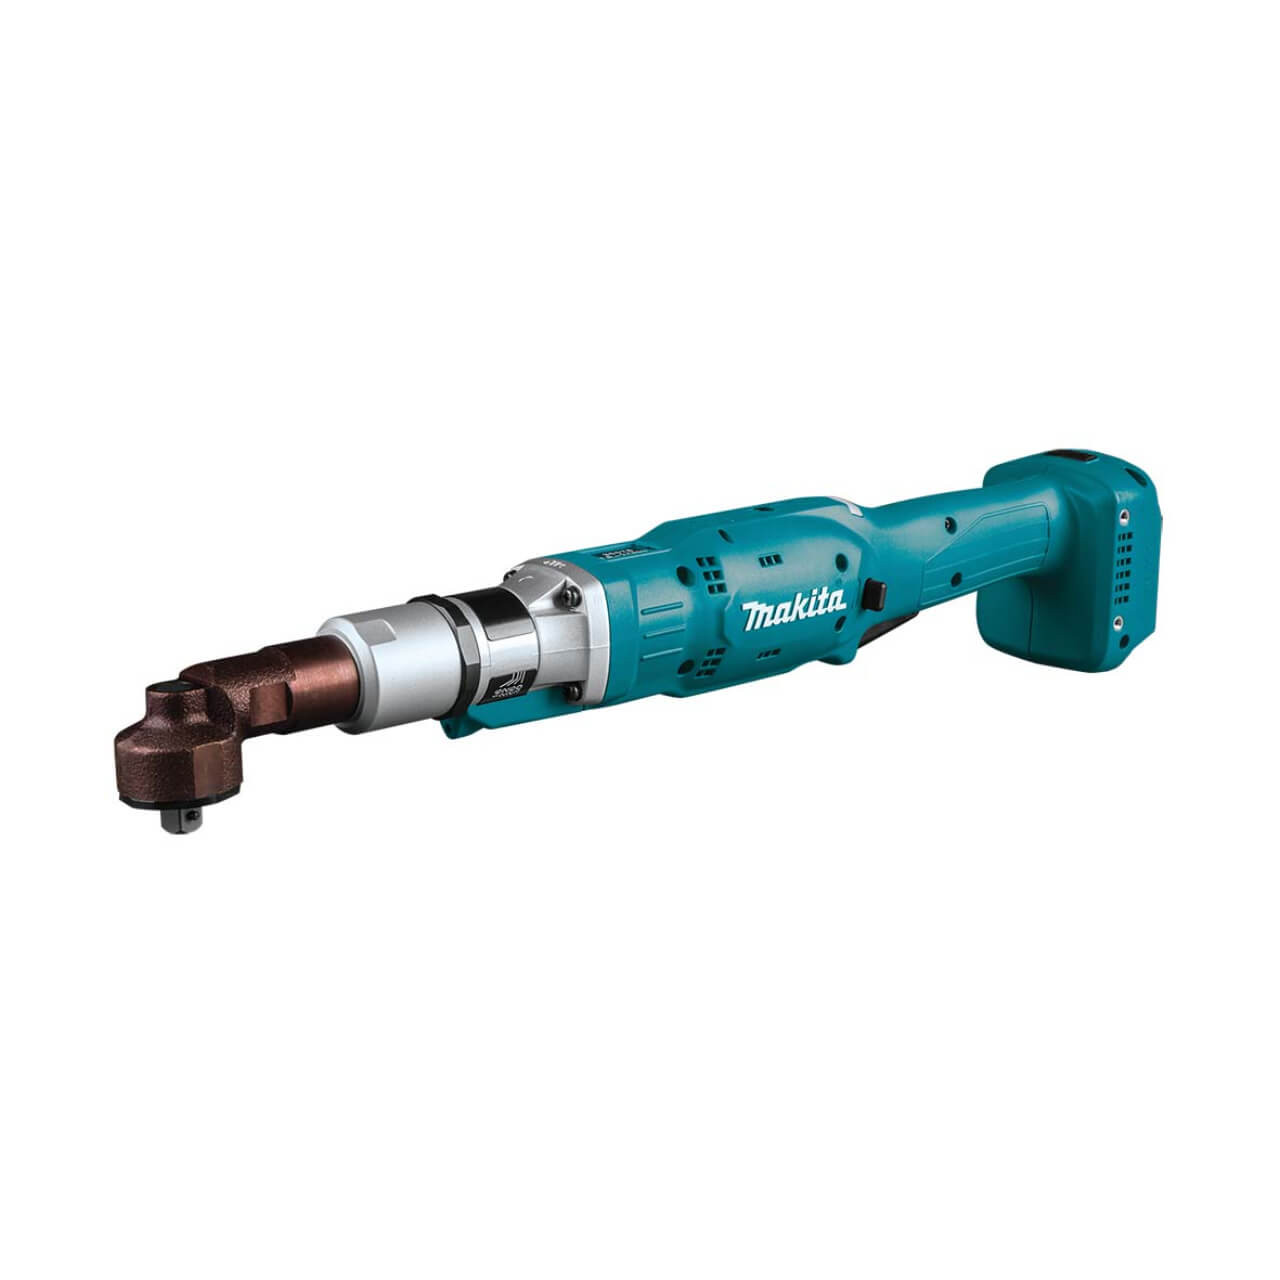 Makita 14.4V BRUSHLESS 3/8” Angled Torque Wrench. 16-30Nm. 70-230rpm - Tool Only